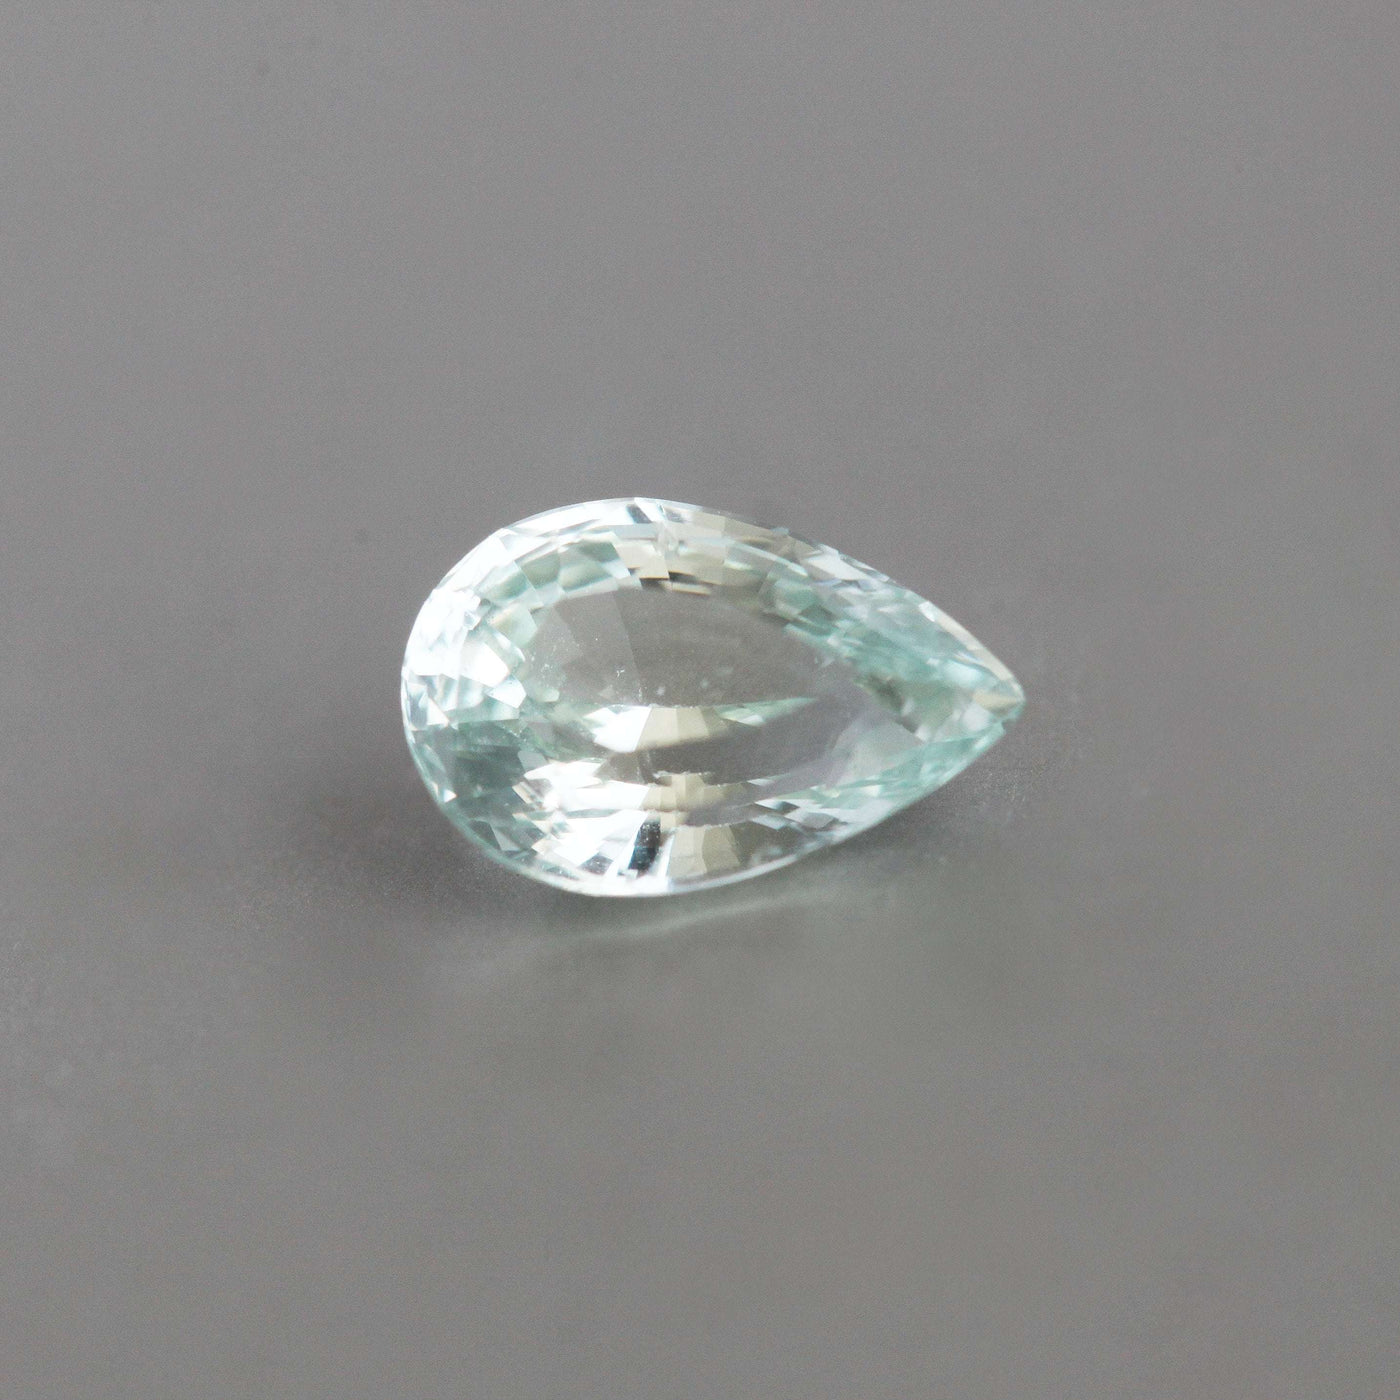 Loose pear-shaped green sapphire